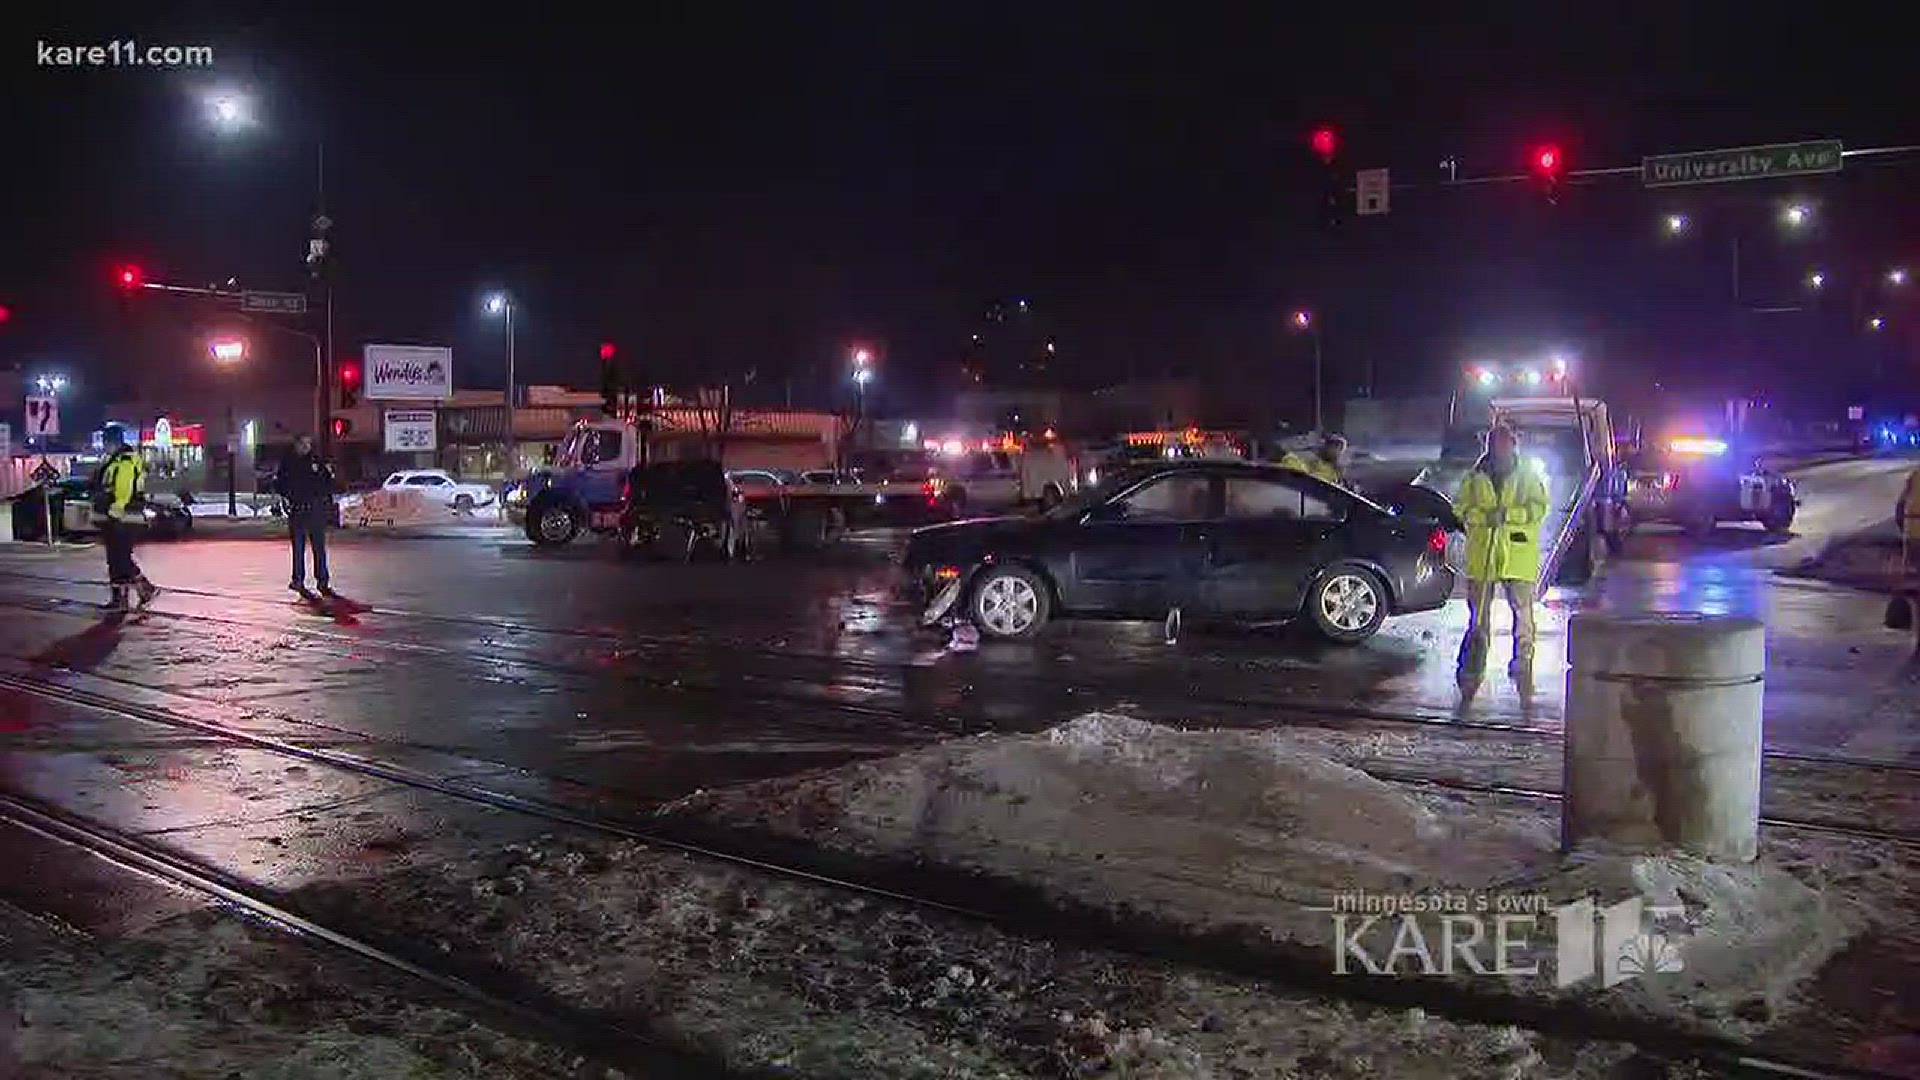 The chase, involving a stolen minivan, ended in a crash. Officers are still looking for multiple people who ran from the stolen van. http://kare11.tv/2GdKJoC